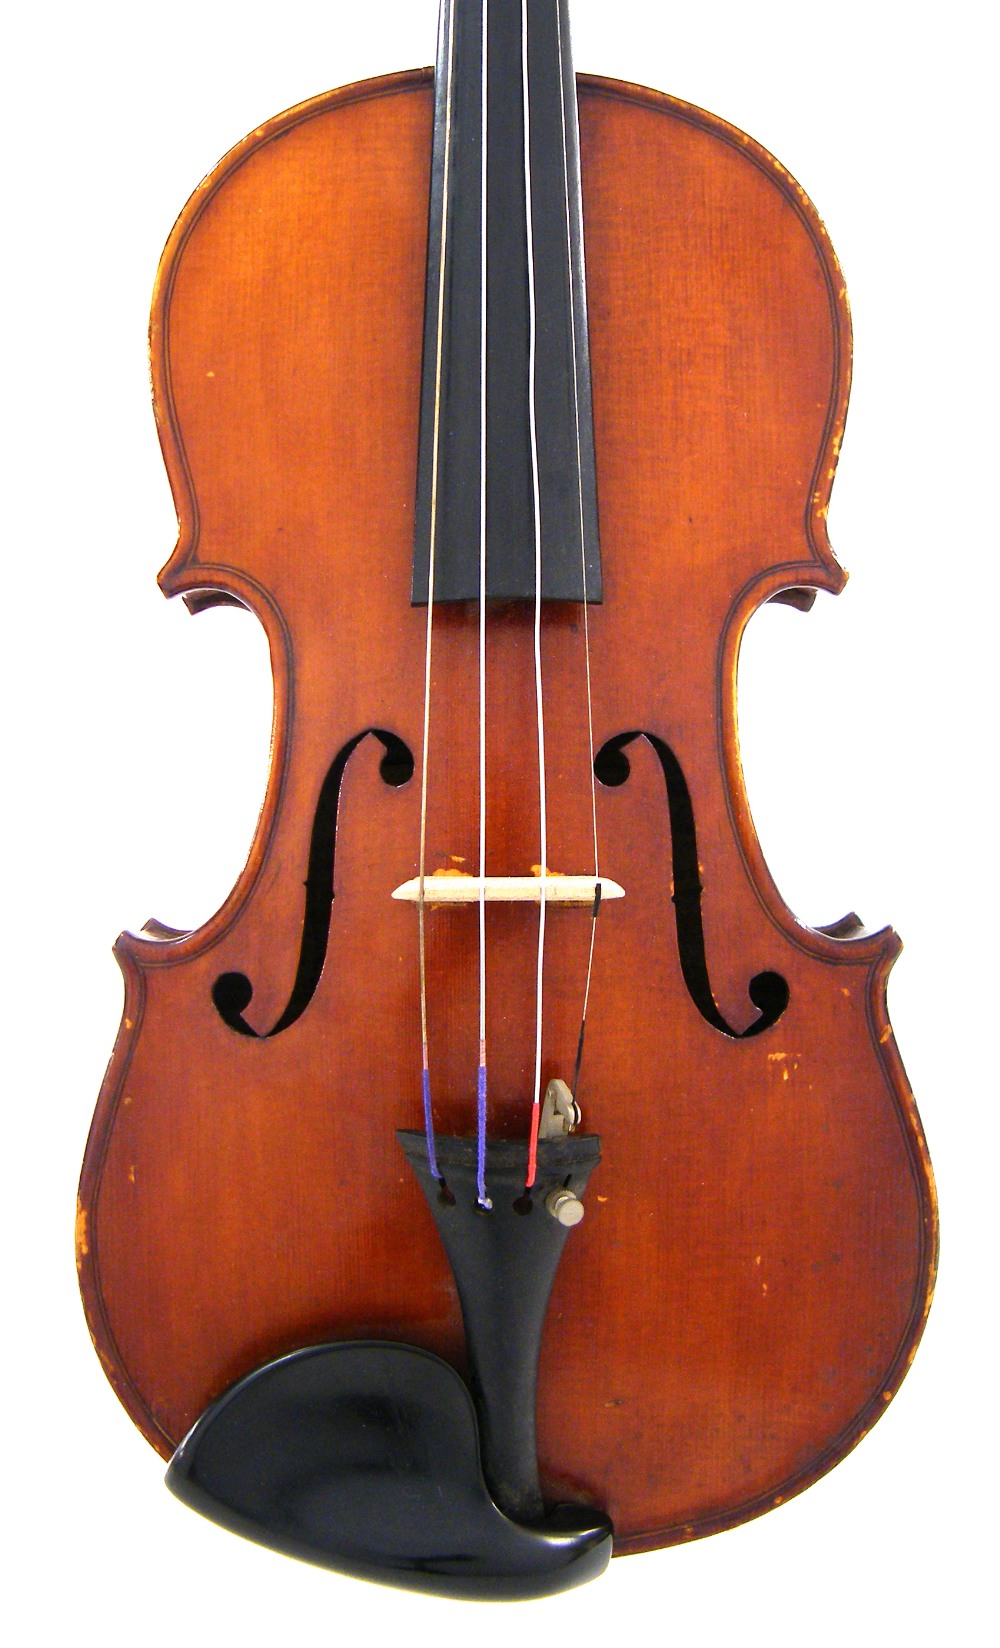 Scottish violin by and labelled Alex: Smillie Fecit Crosshill, Glasgow, 1890, no. 10, the jointed